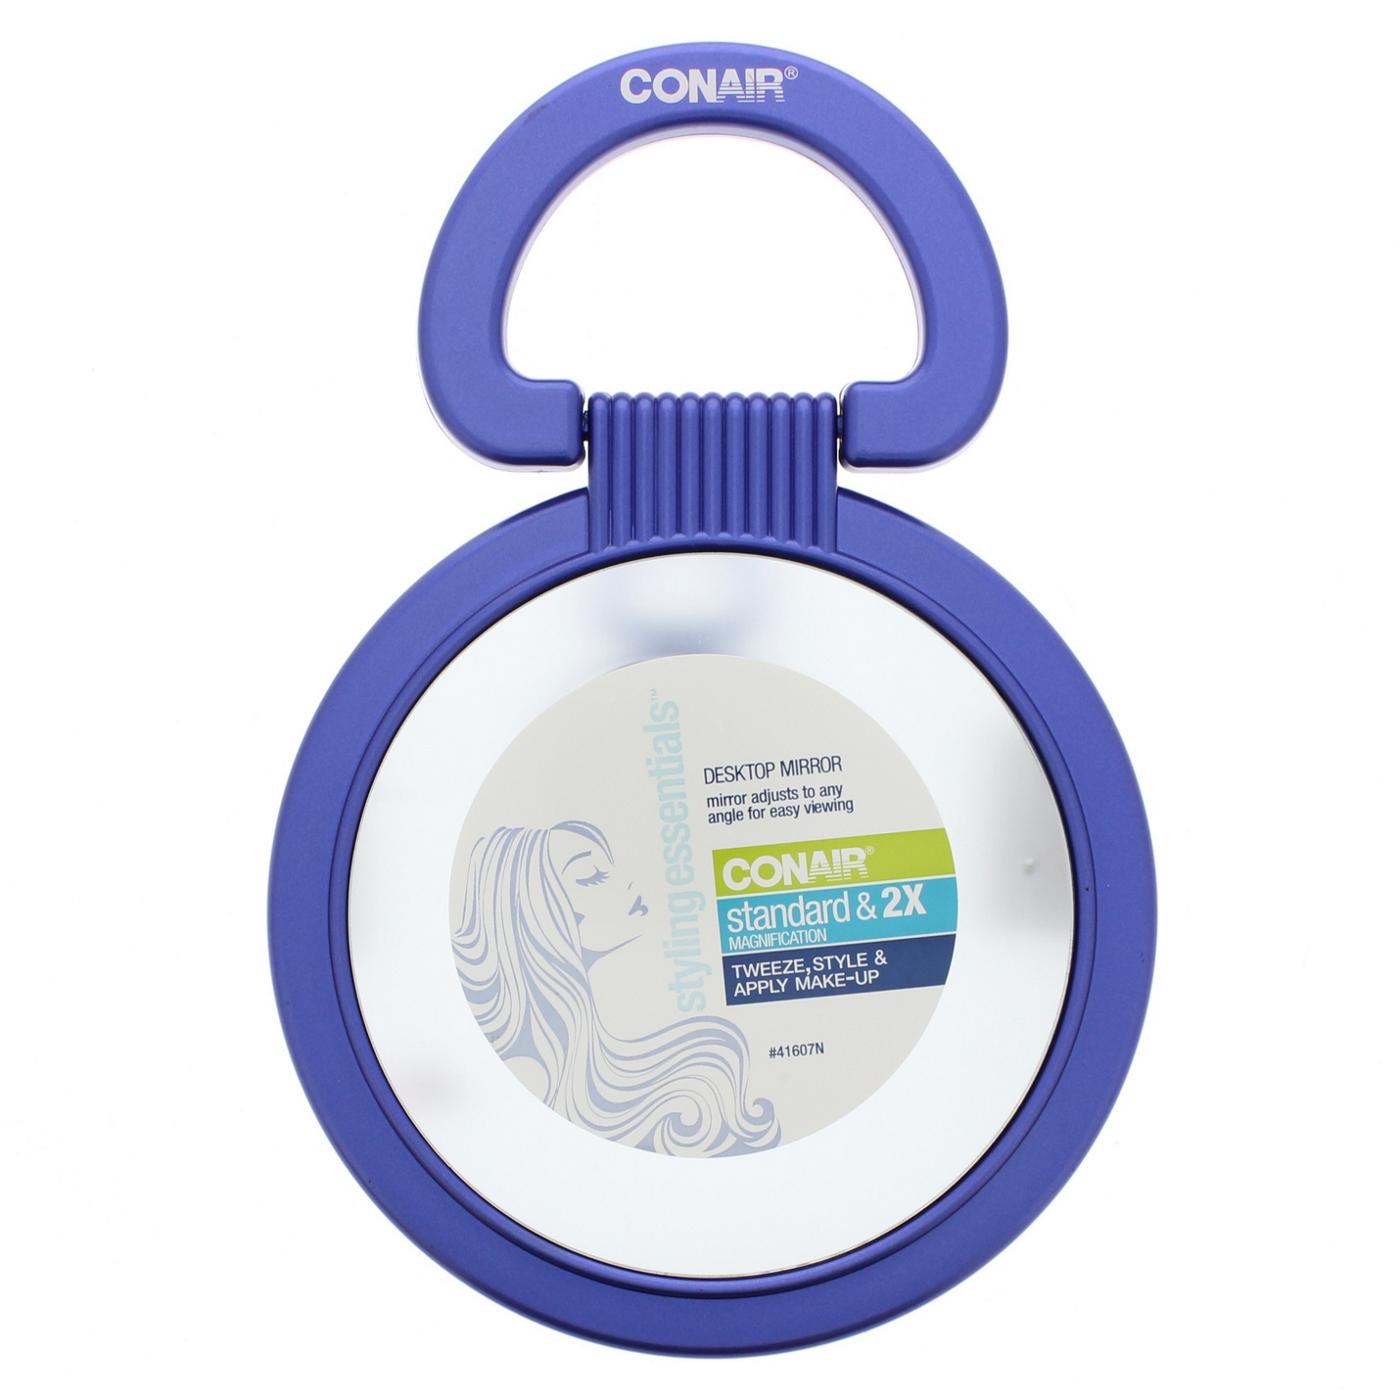 Conair Styling Essentials 3-in-1 Standard Mirror with 2X Magnification, Assorted Colors; image 2 of 3